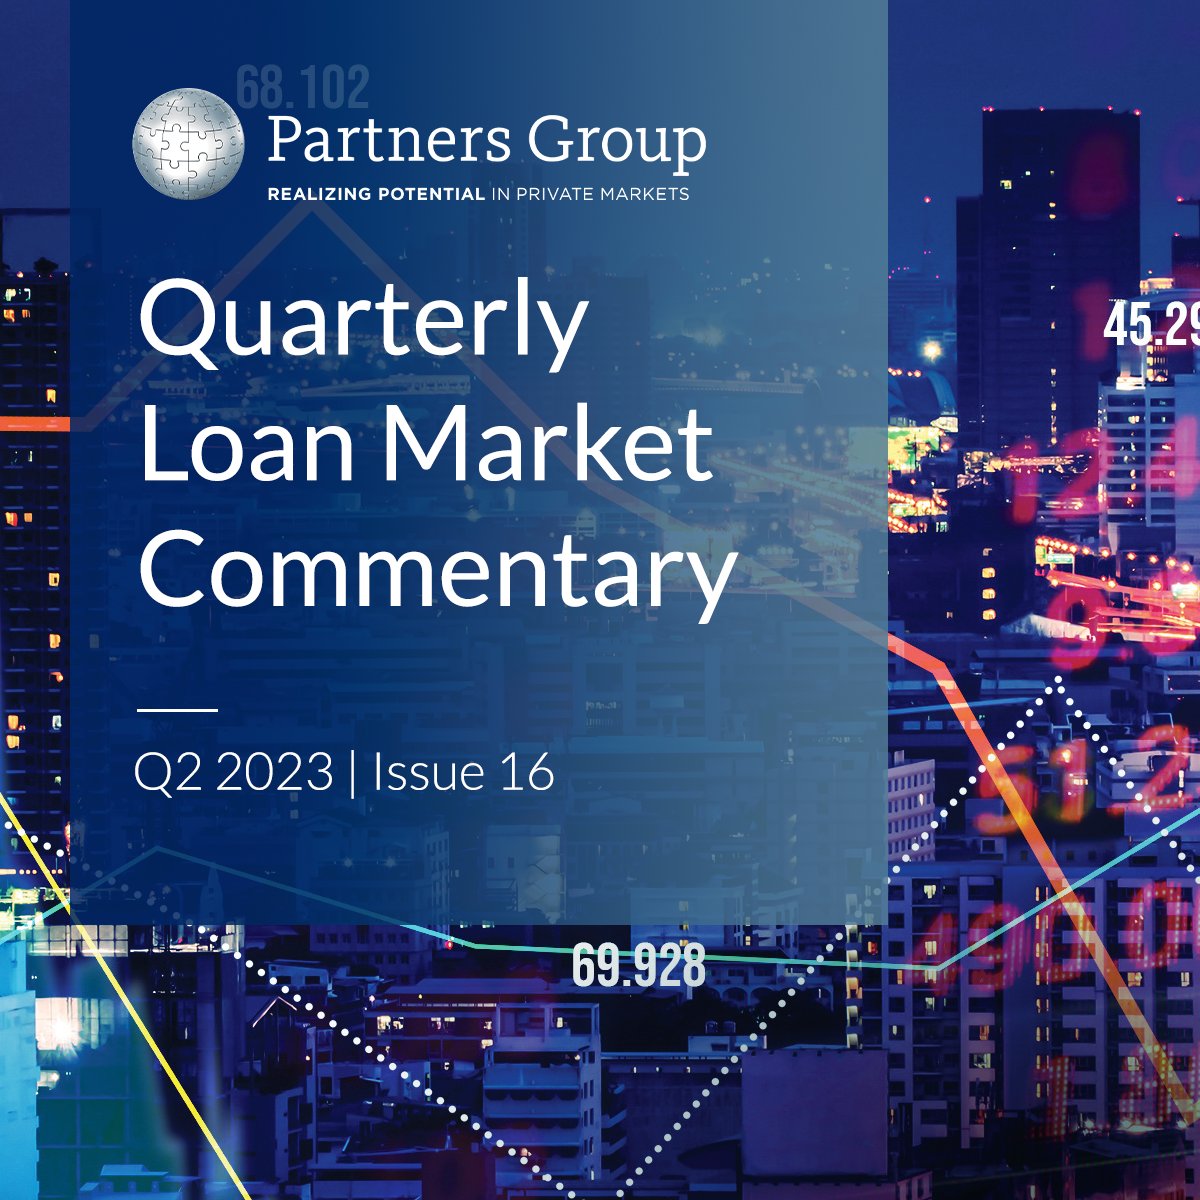 Read our Q2 2023 Quarterly Loan Market Commentary for the latest on the global liquid loans market: partnersgroup.com/fileadmin/user…